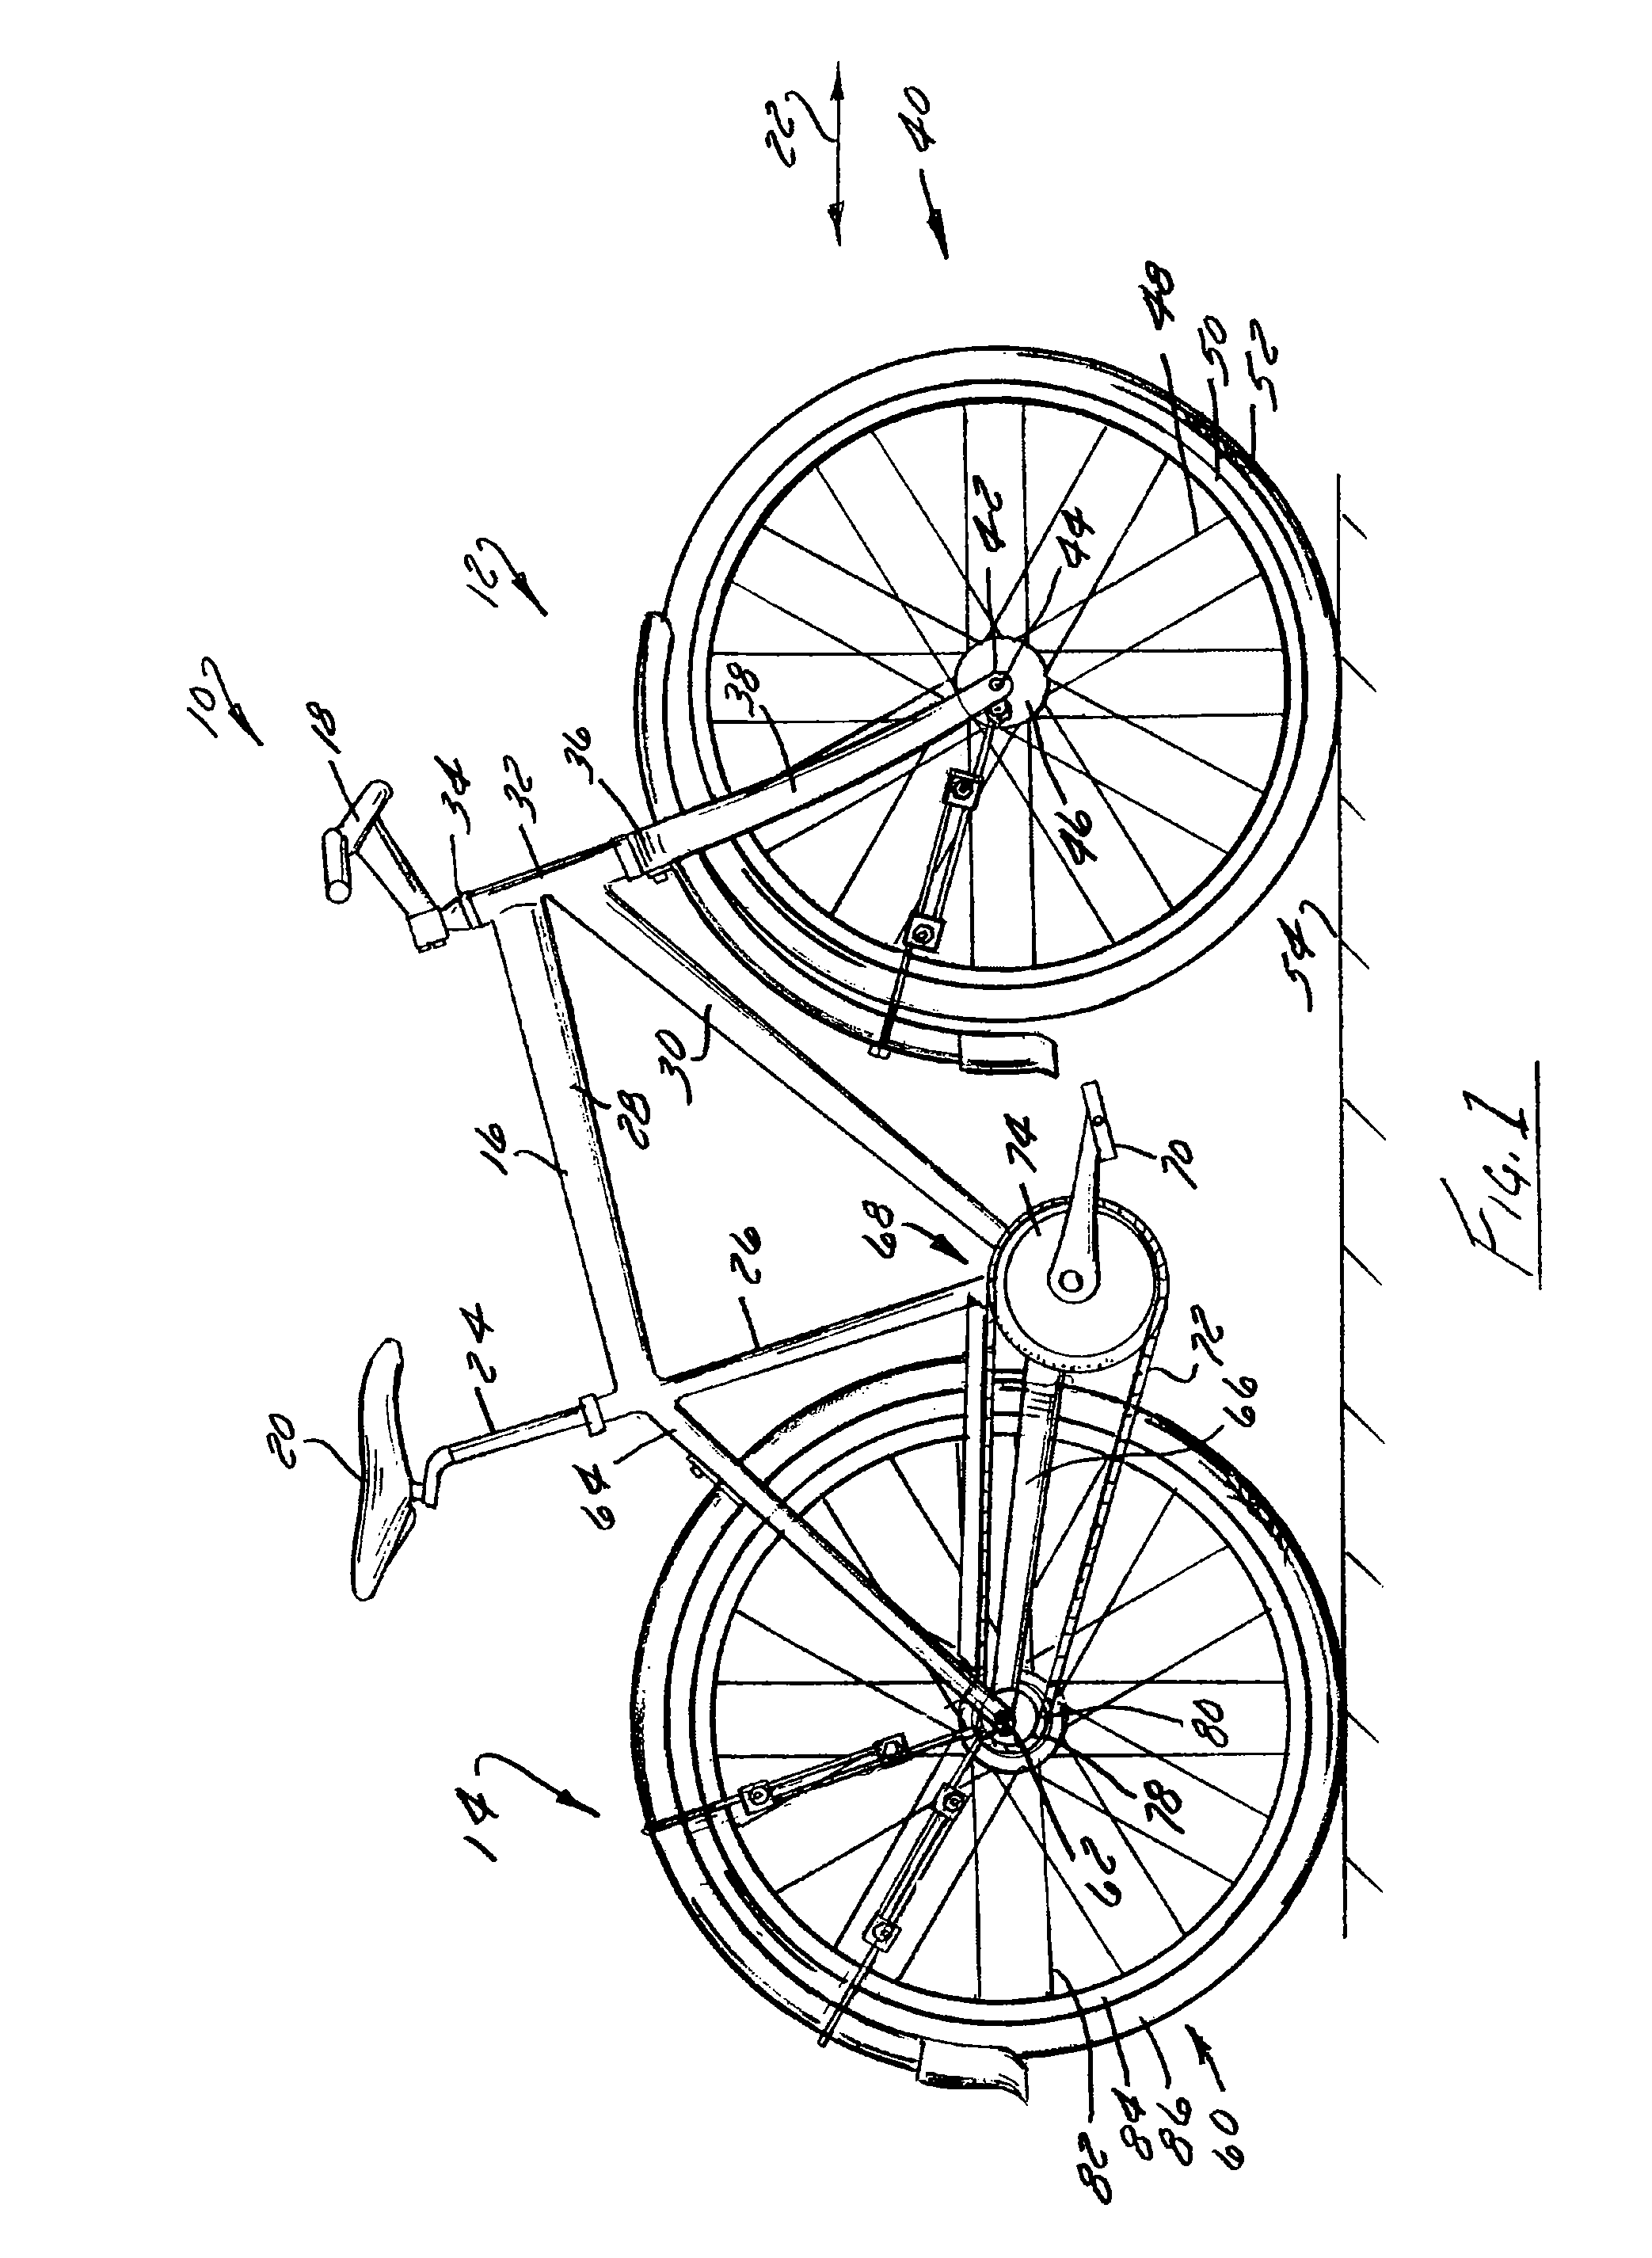 Adjustable bicycle fender assembly